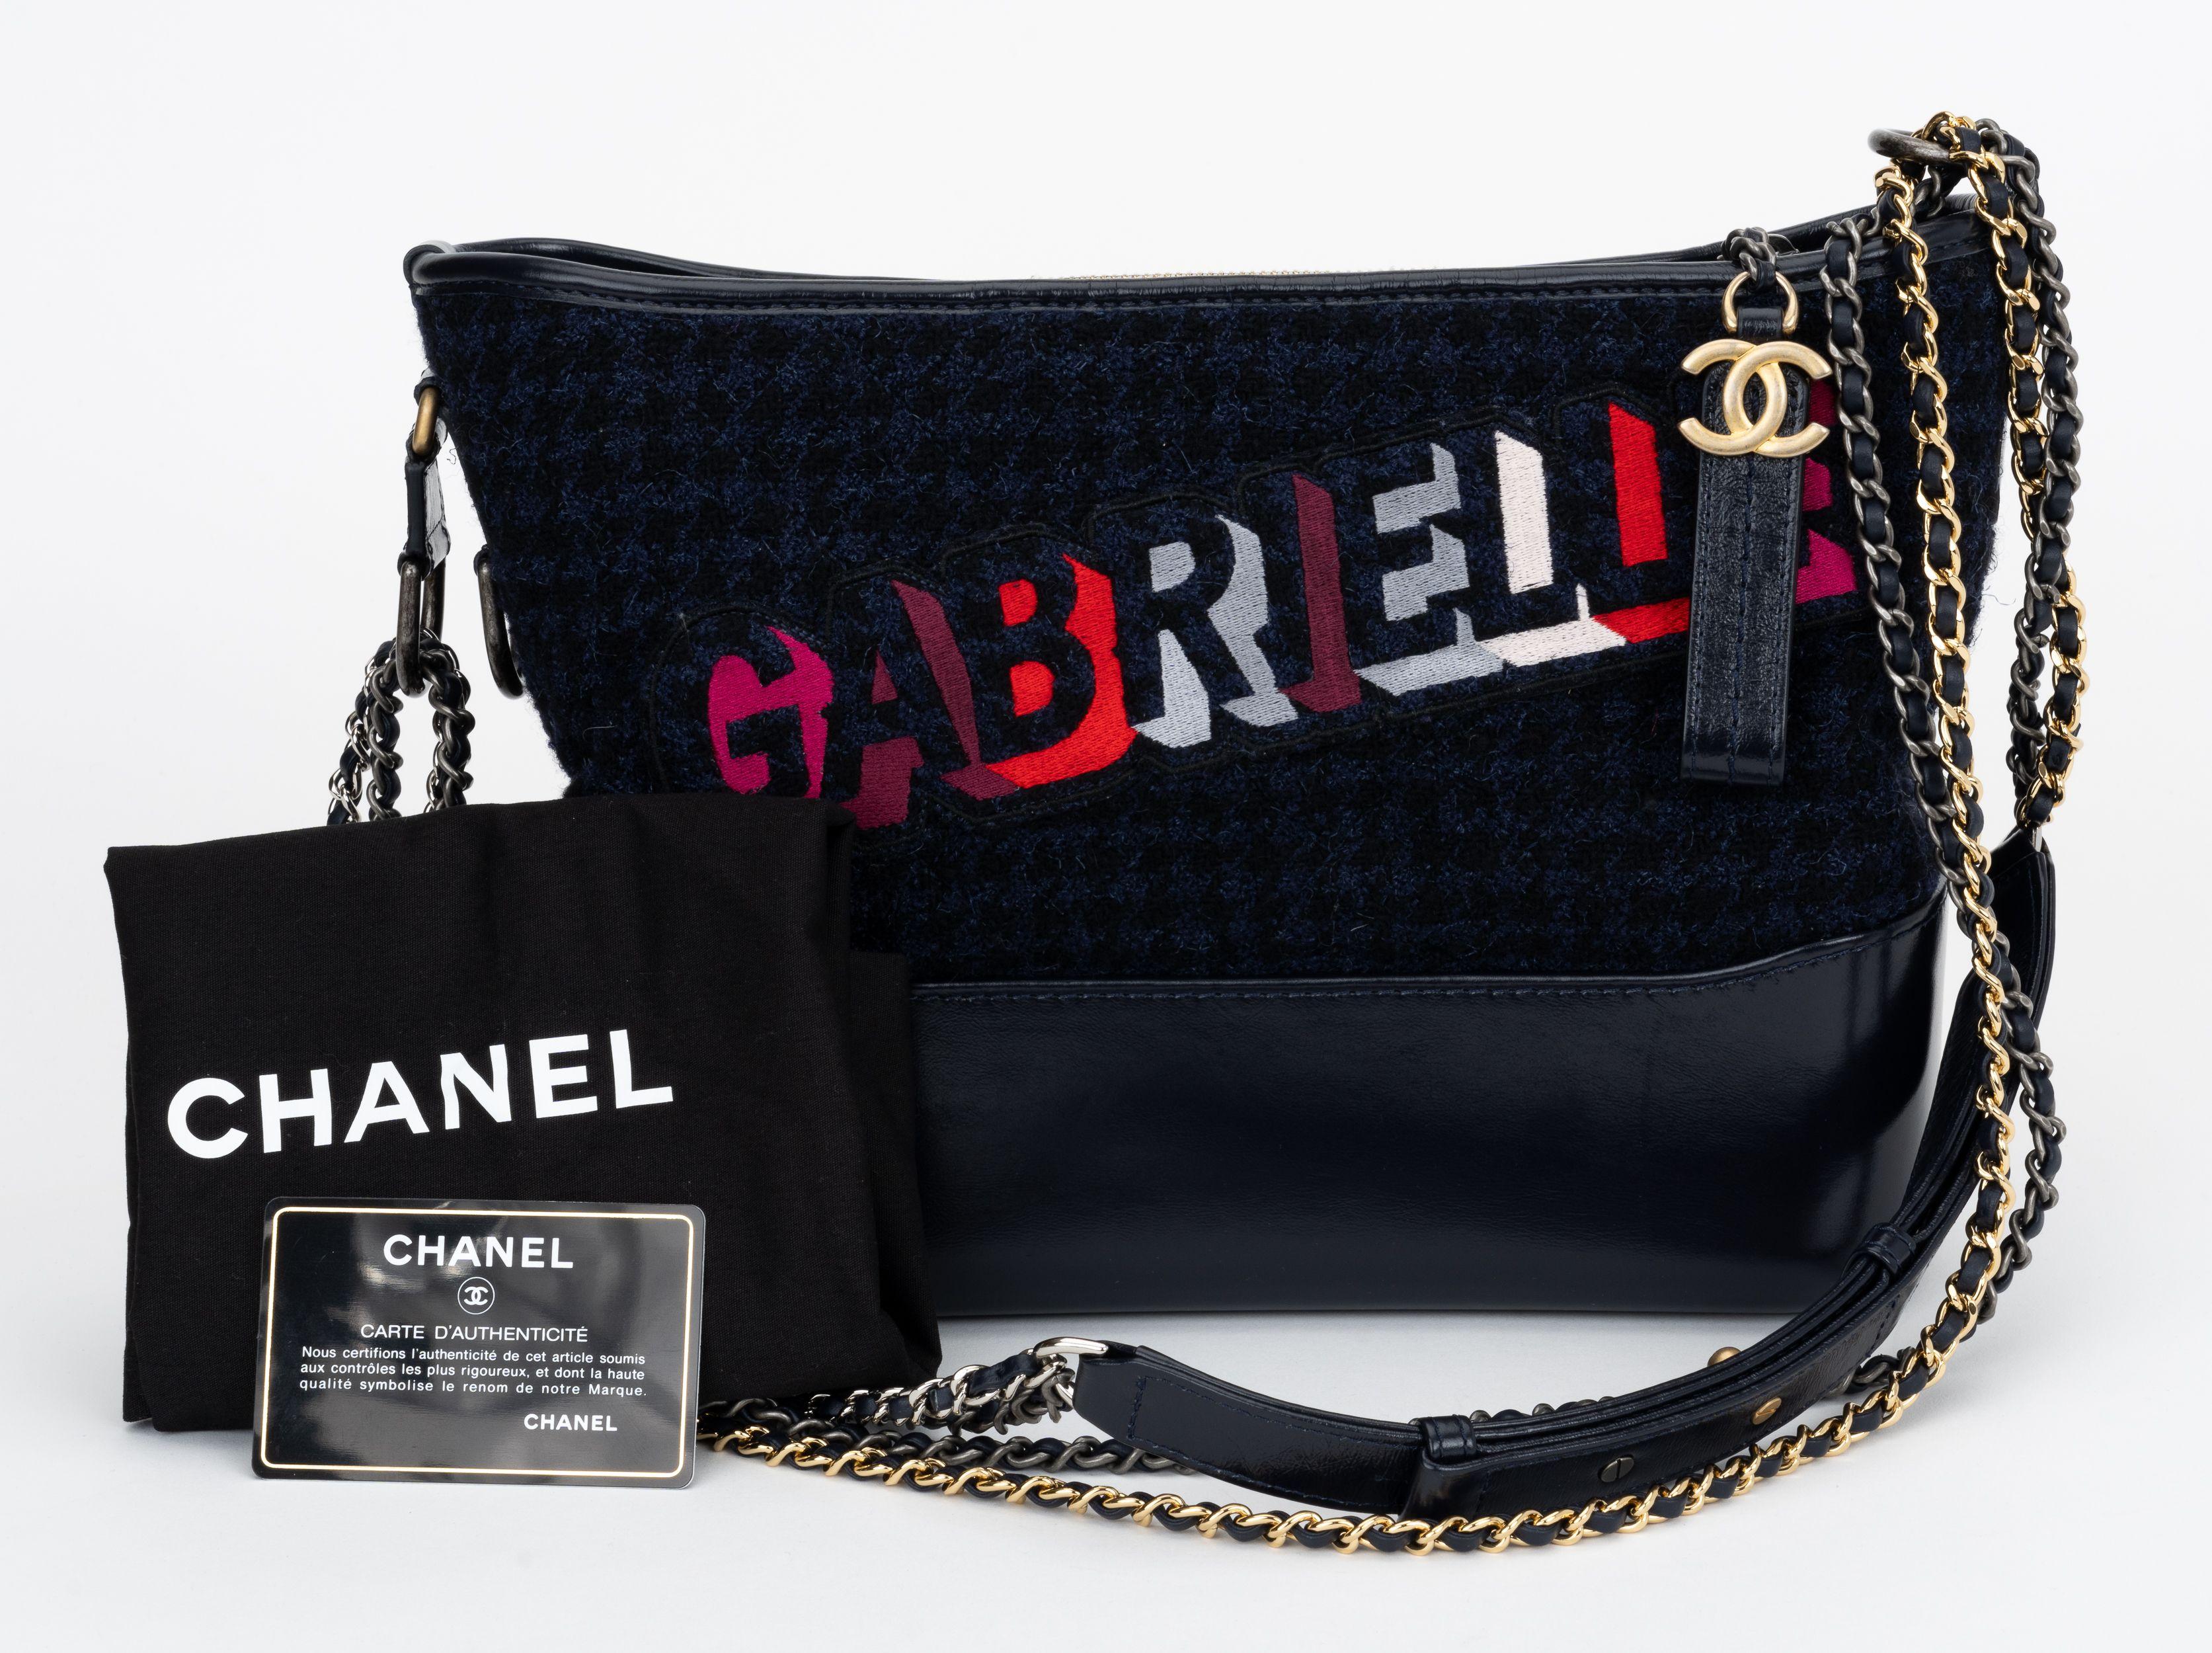 Chanel Navy Tweed Gabrielle Bag For Sale 4